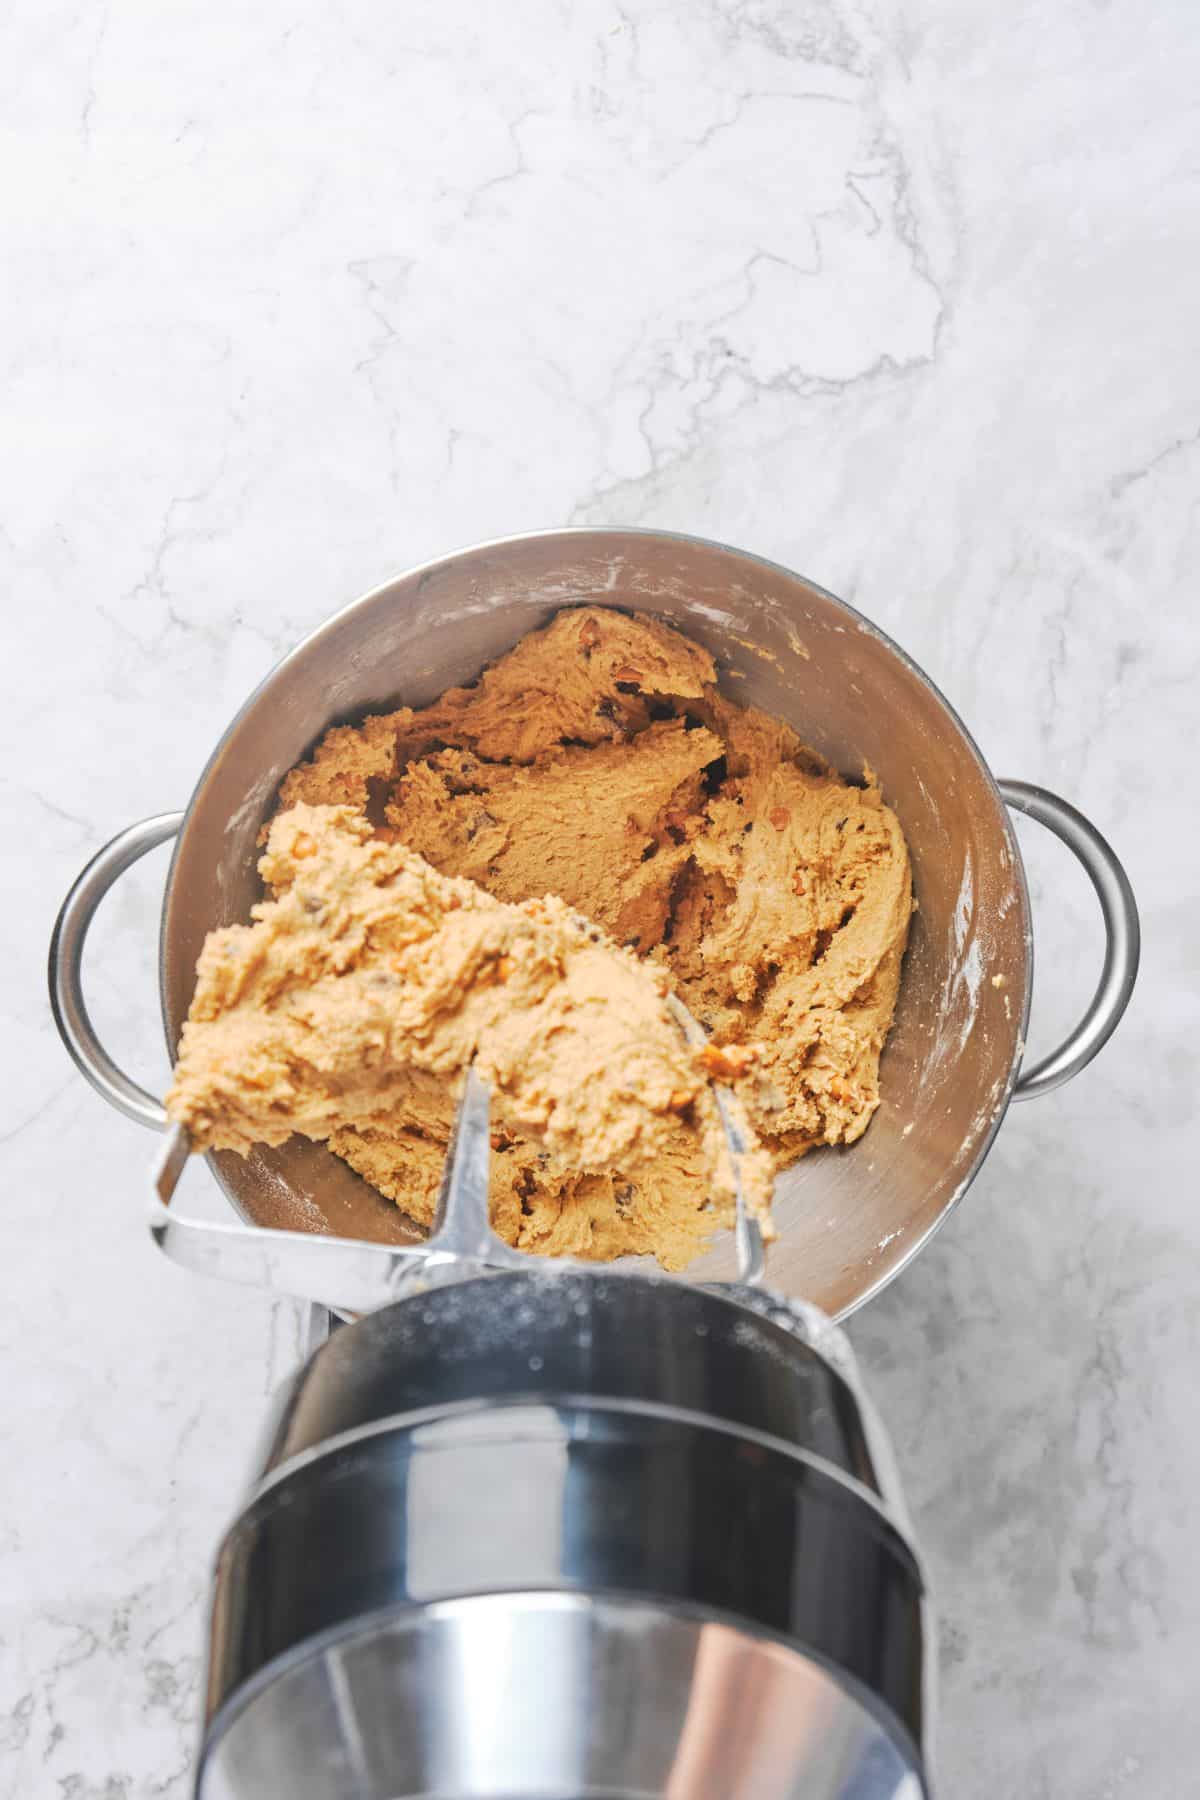 Butterscotch cookie dough that has just been blended before adding chocolate chips and butterscotch chips.